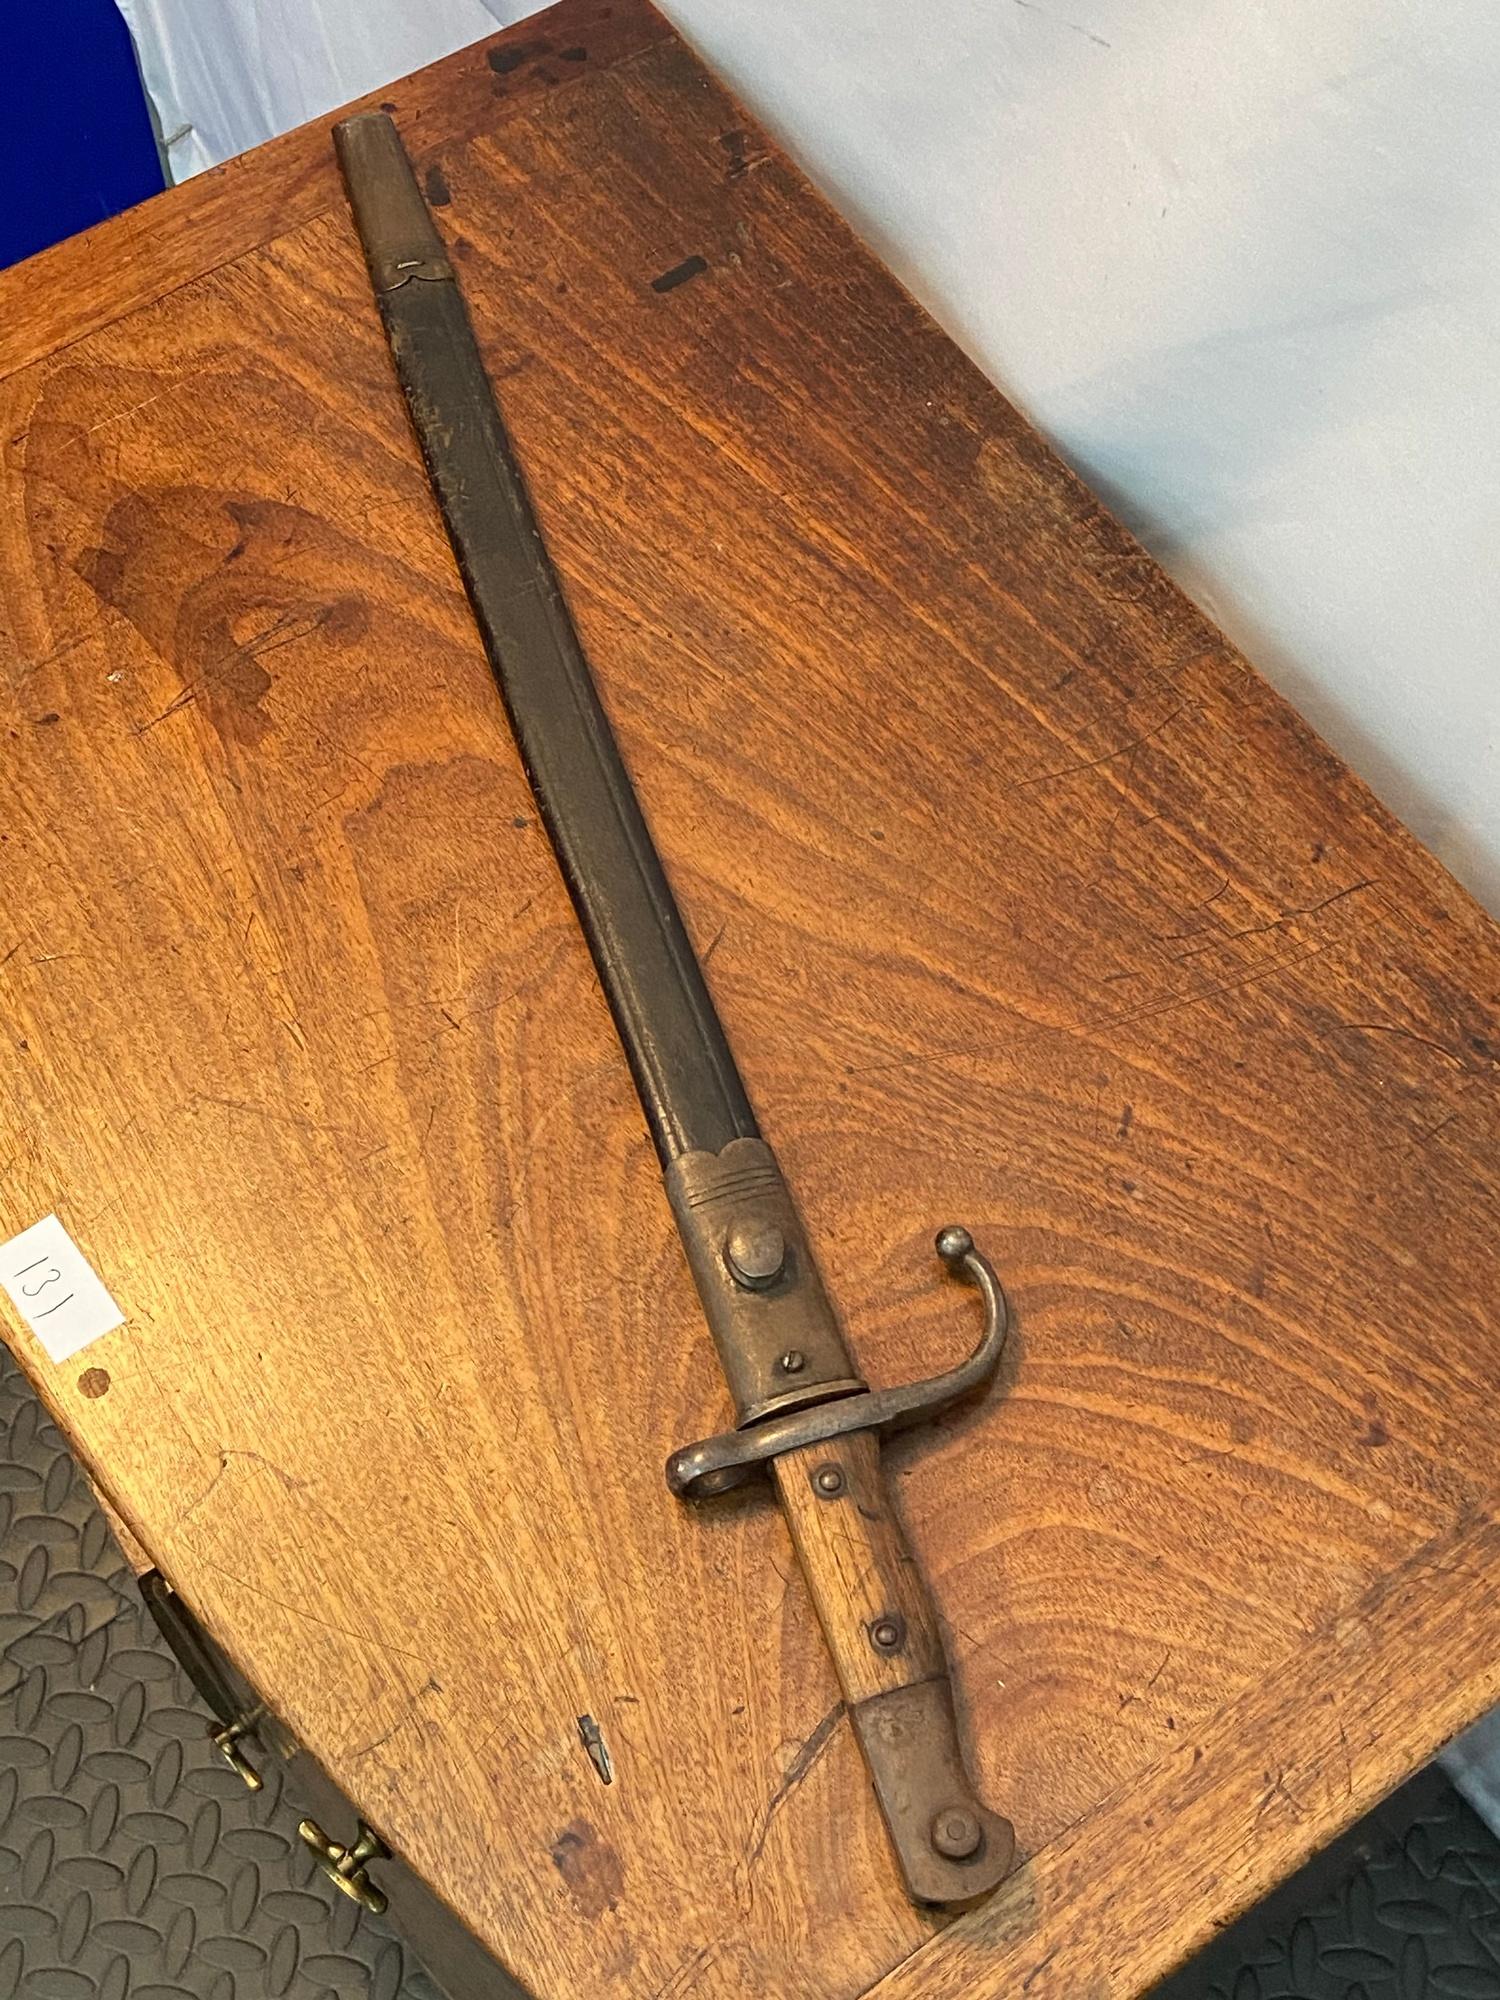 Model 1890 Turkish Mauser Bayonet with scabbard. Stamped with Turkish writing to the hilt of the - Image 11 of 11